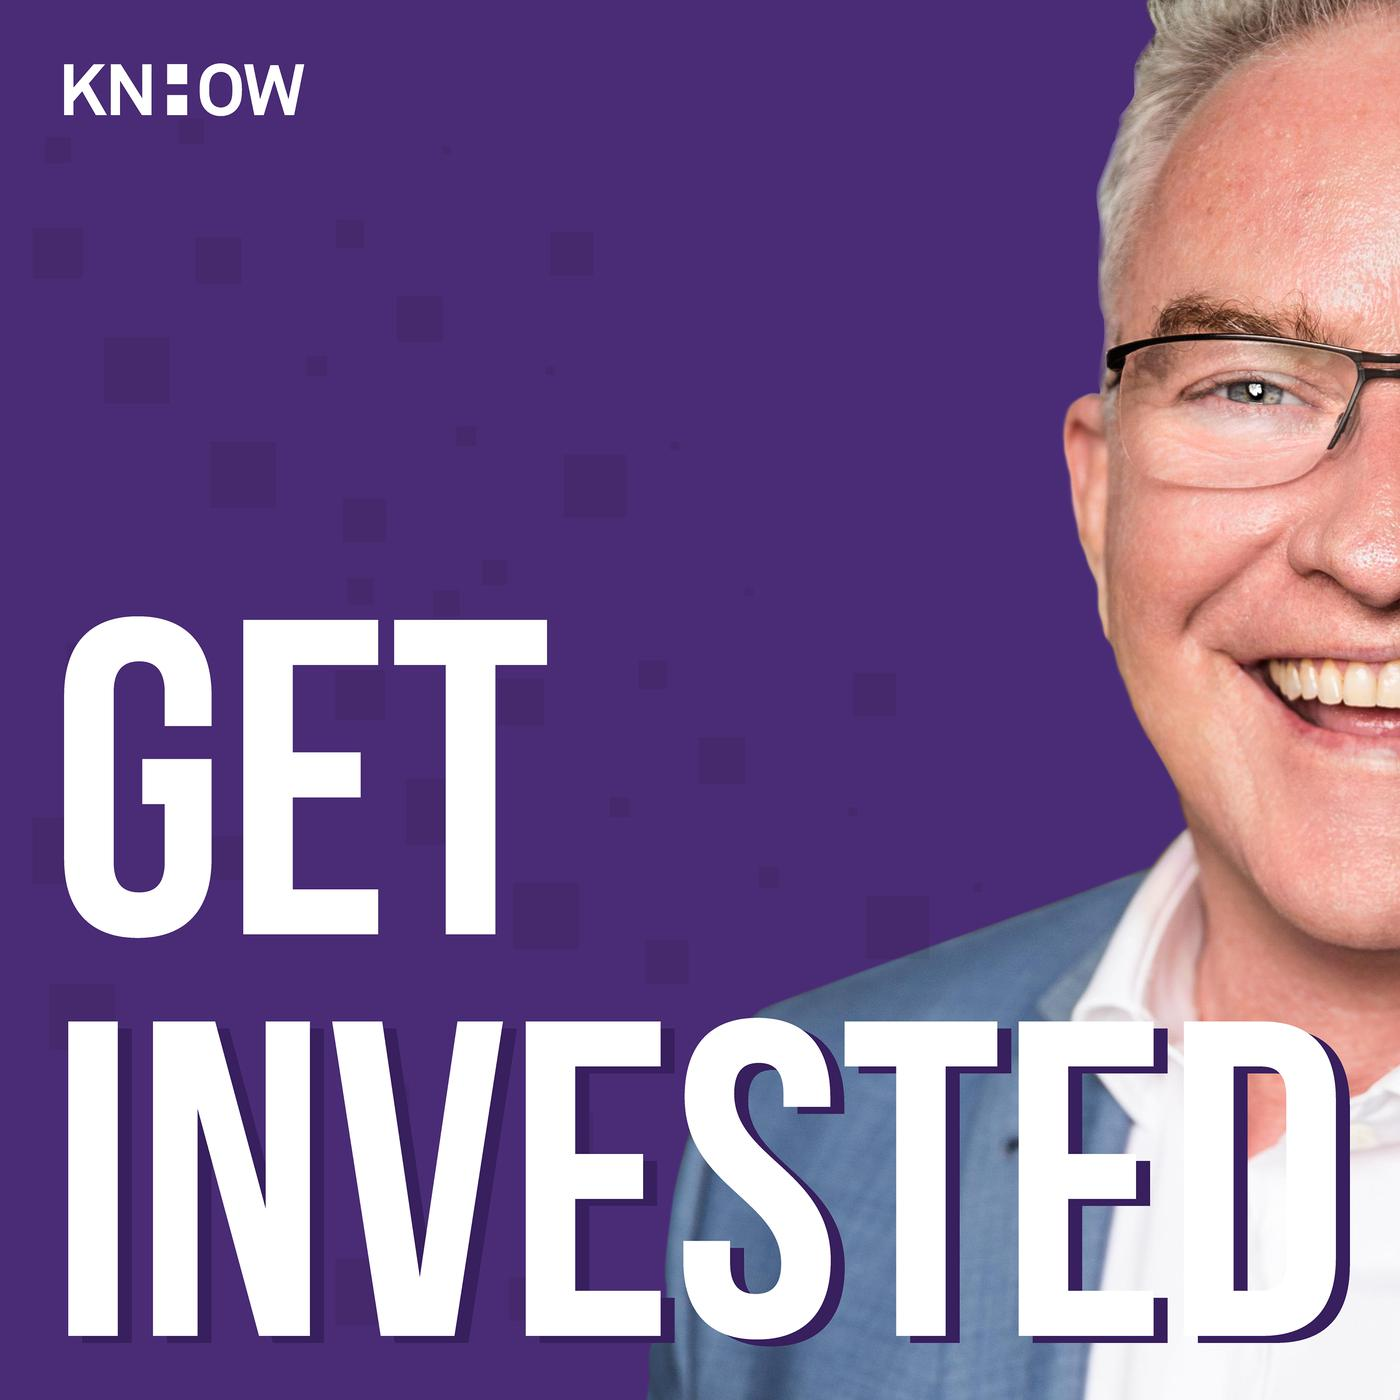 Get Invested: Part 2 - Michael Olivieri on local investment